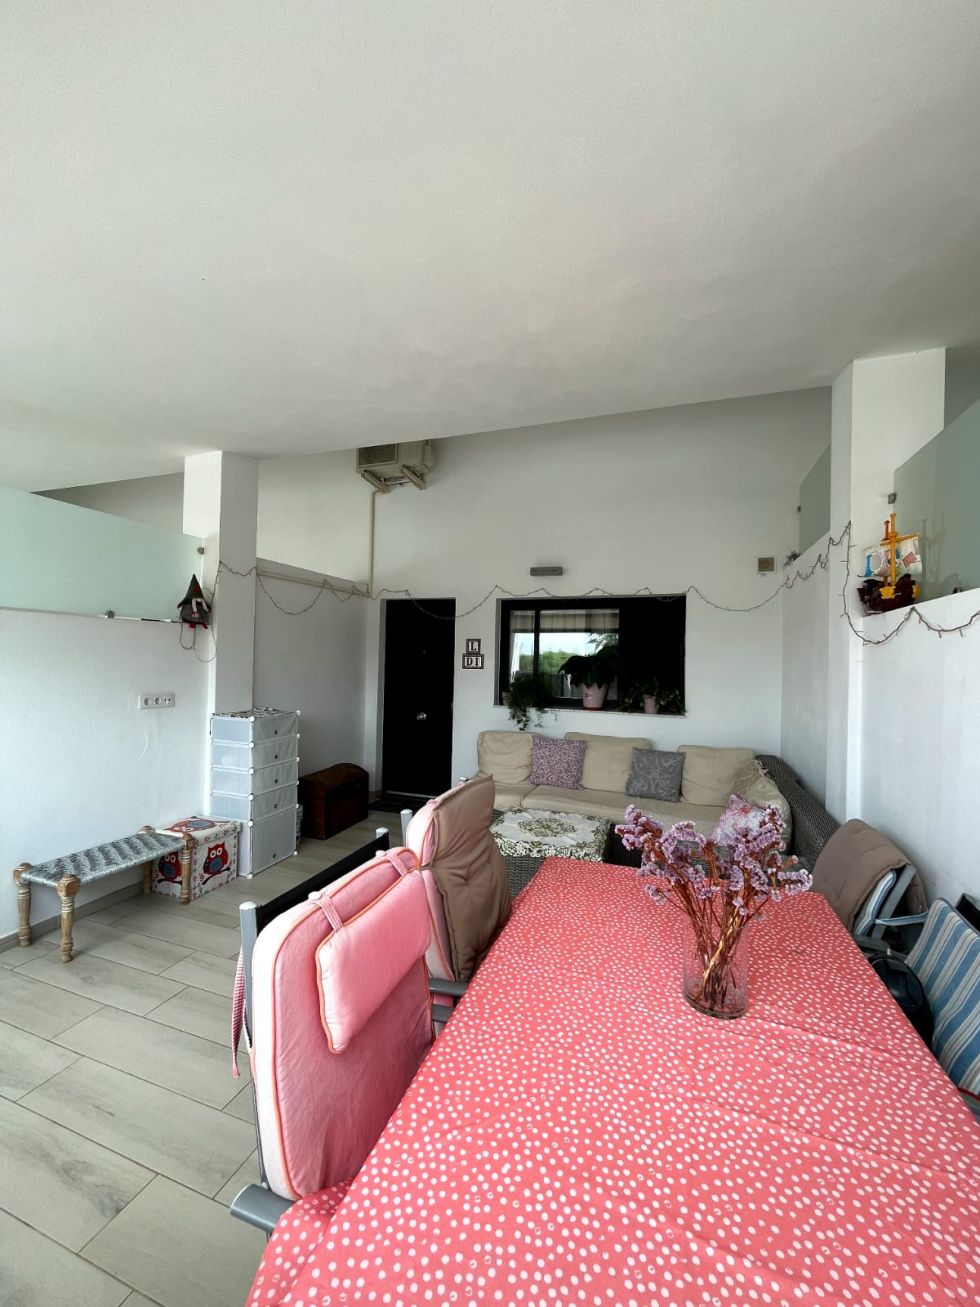 Flat for sale in  Madroñal, Spain - TRC-1902